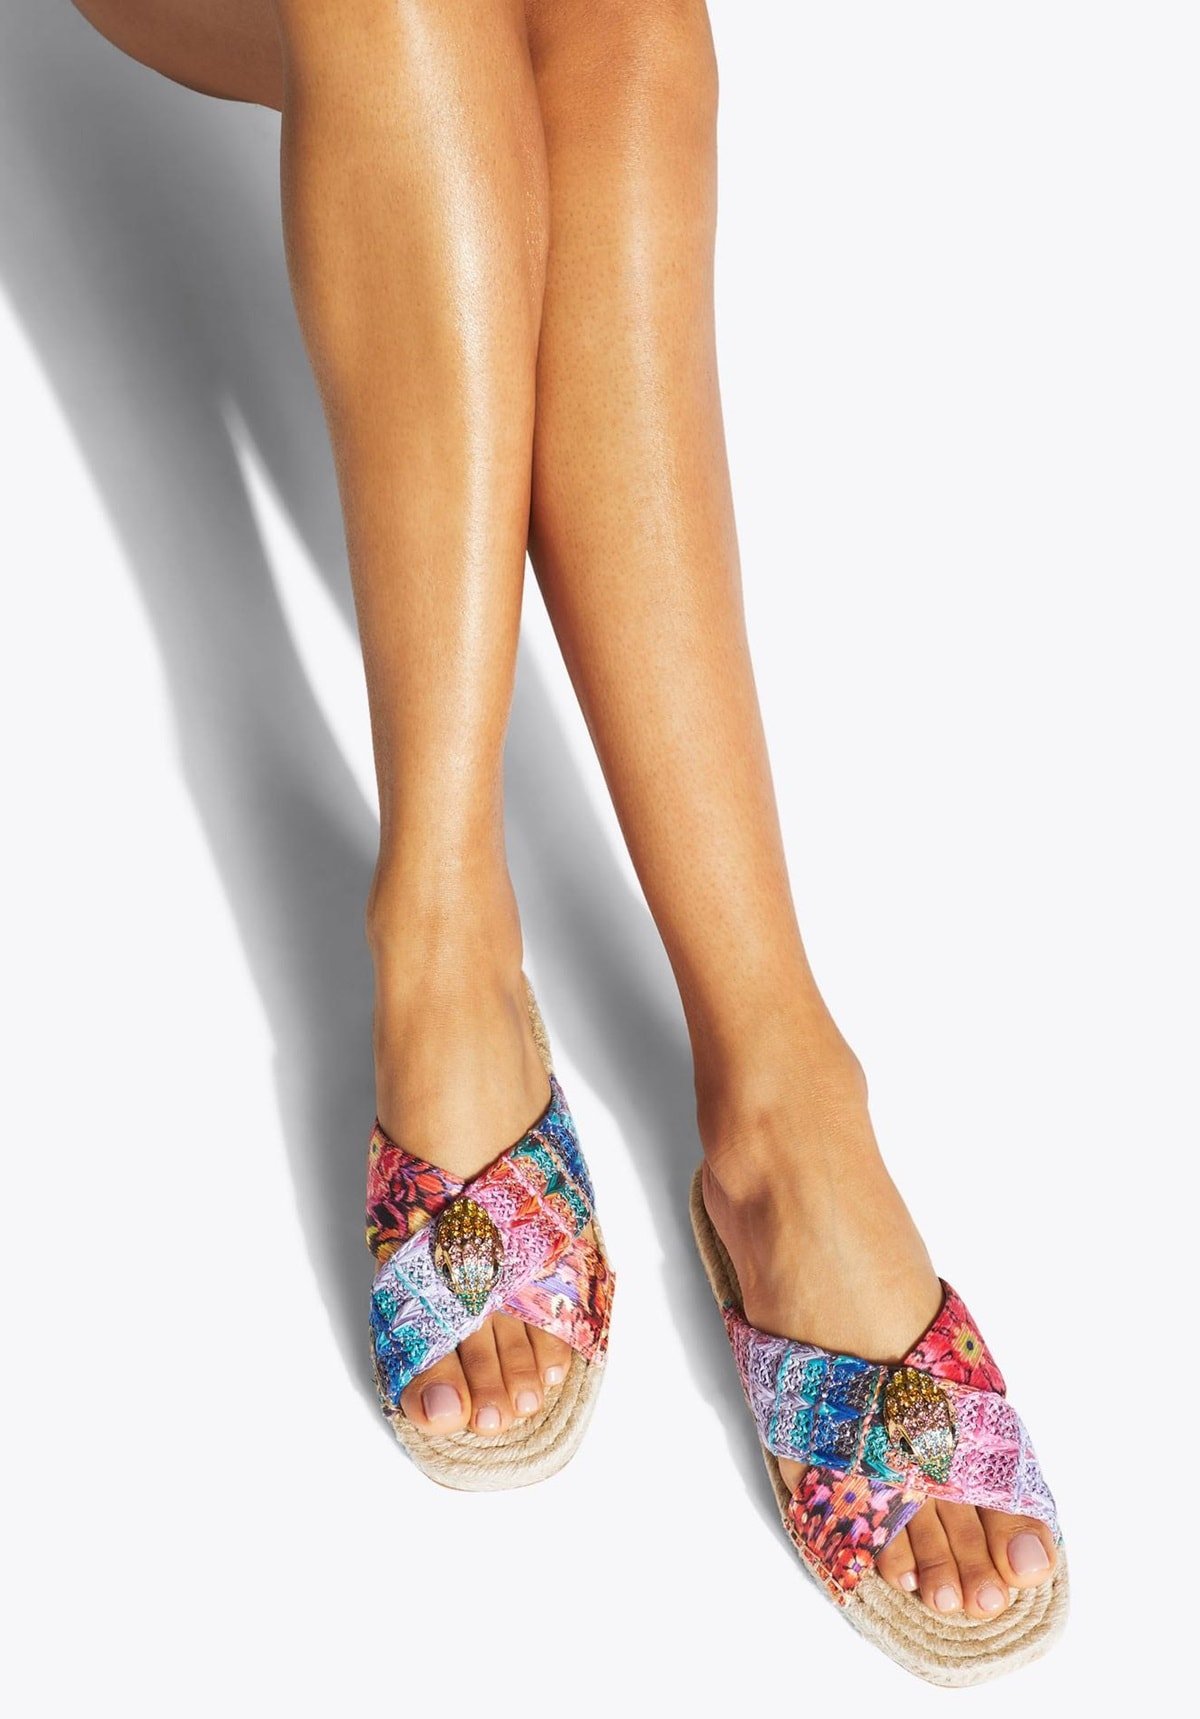 As in all the pieces in the collection, these espadrilles feature a bespoke print created by cult favorite designer Matthew Williamson and boast of rainbow and fuchsia floral motif crossed straps and a gold eagle head with rainbow crystals on each sandal